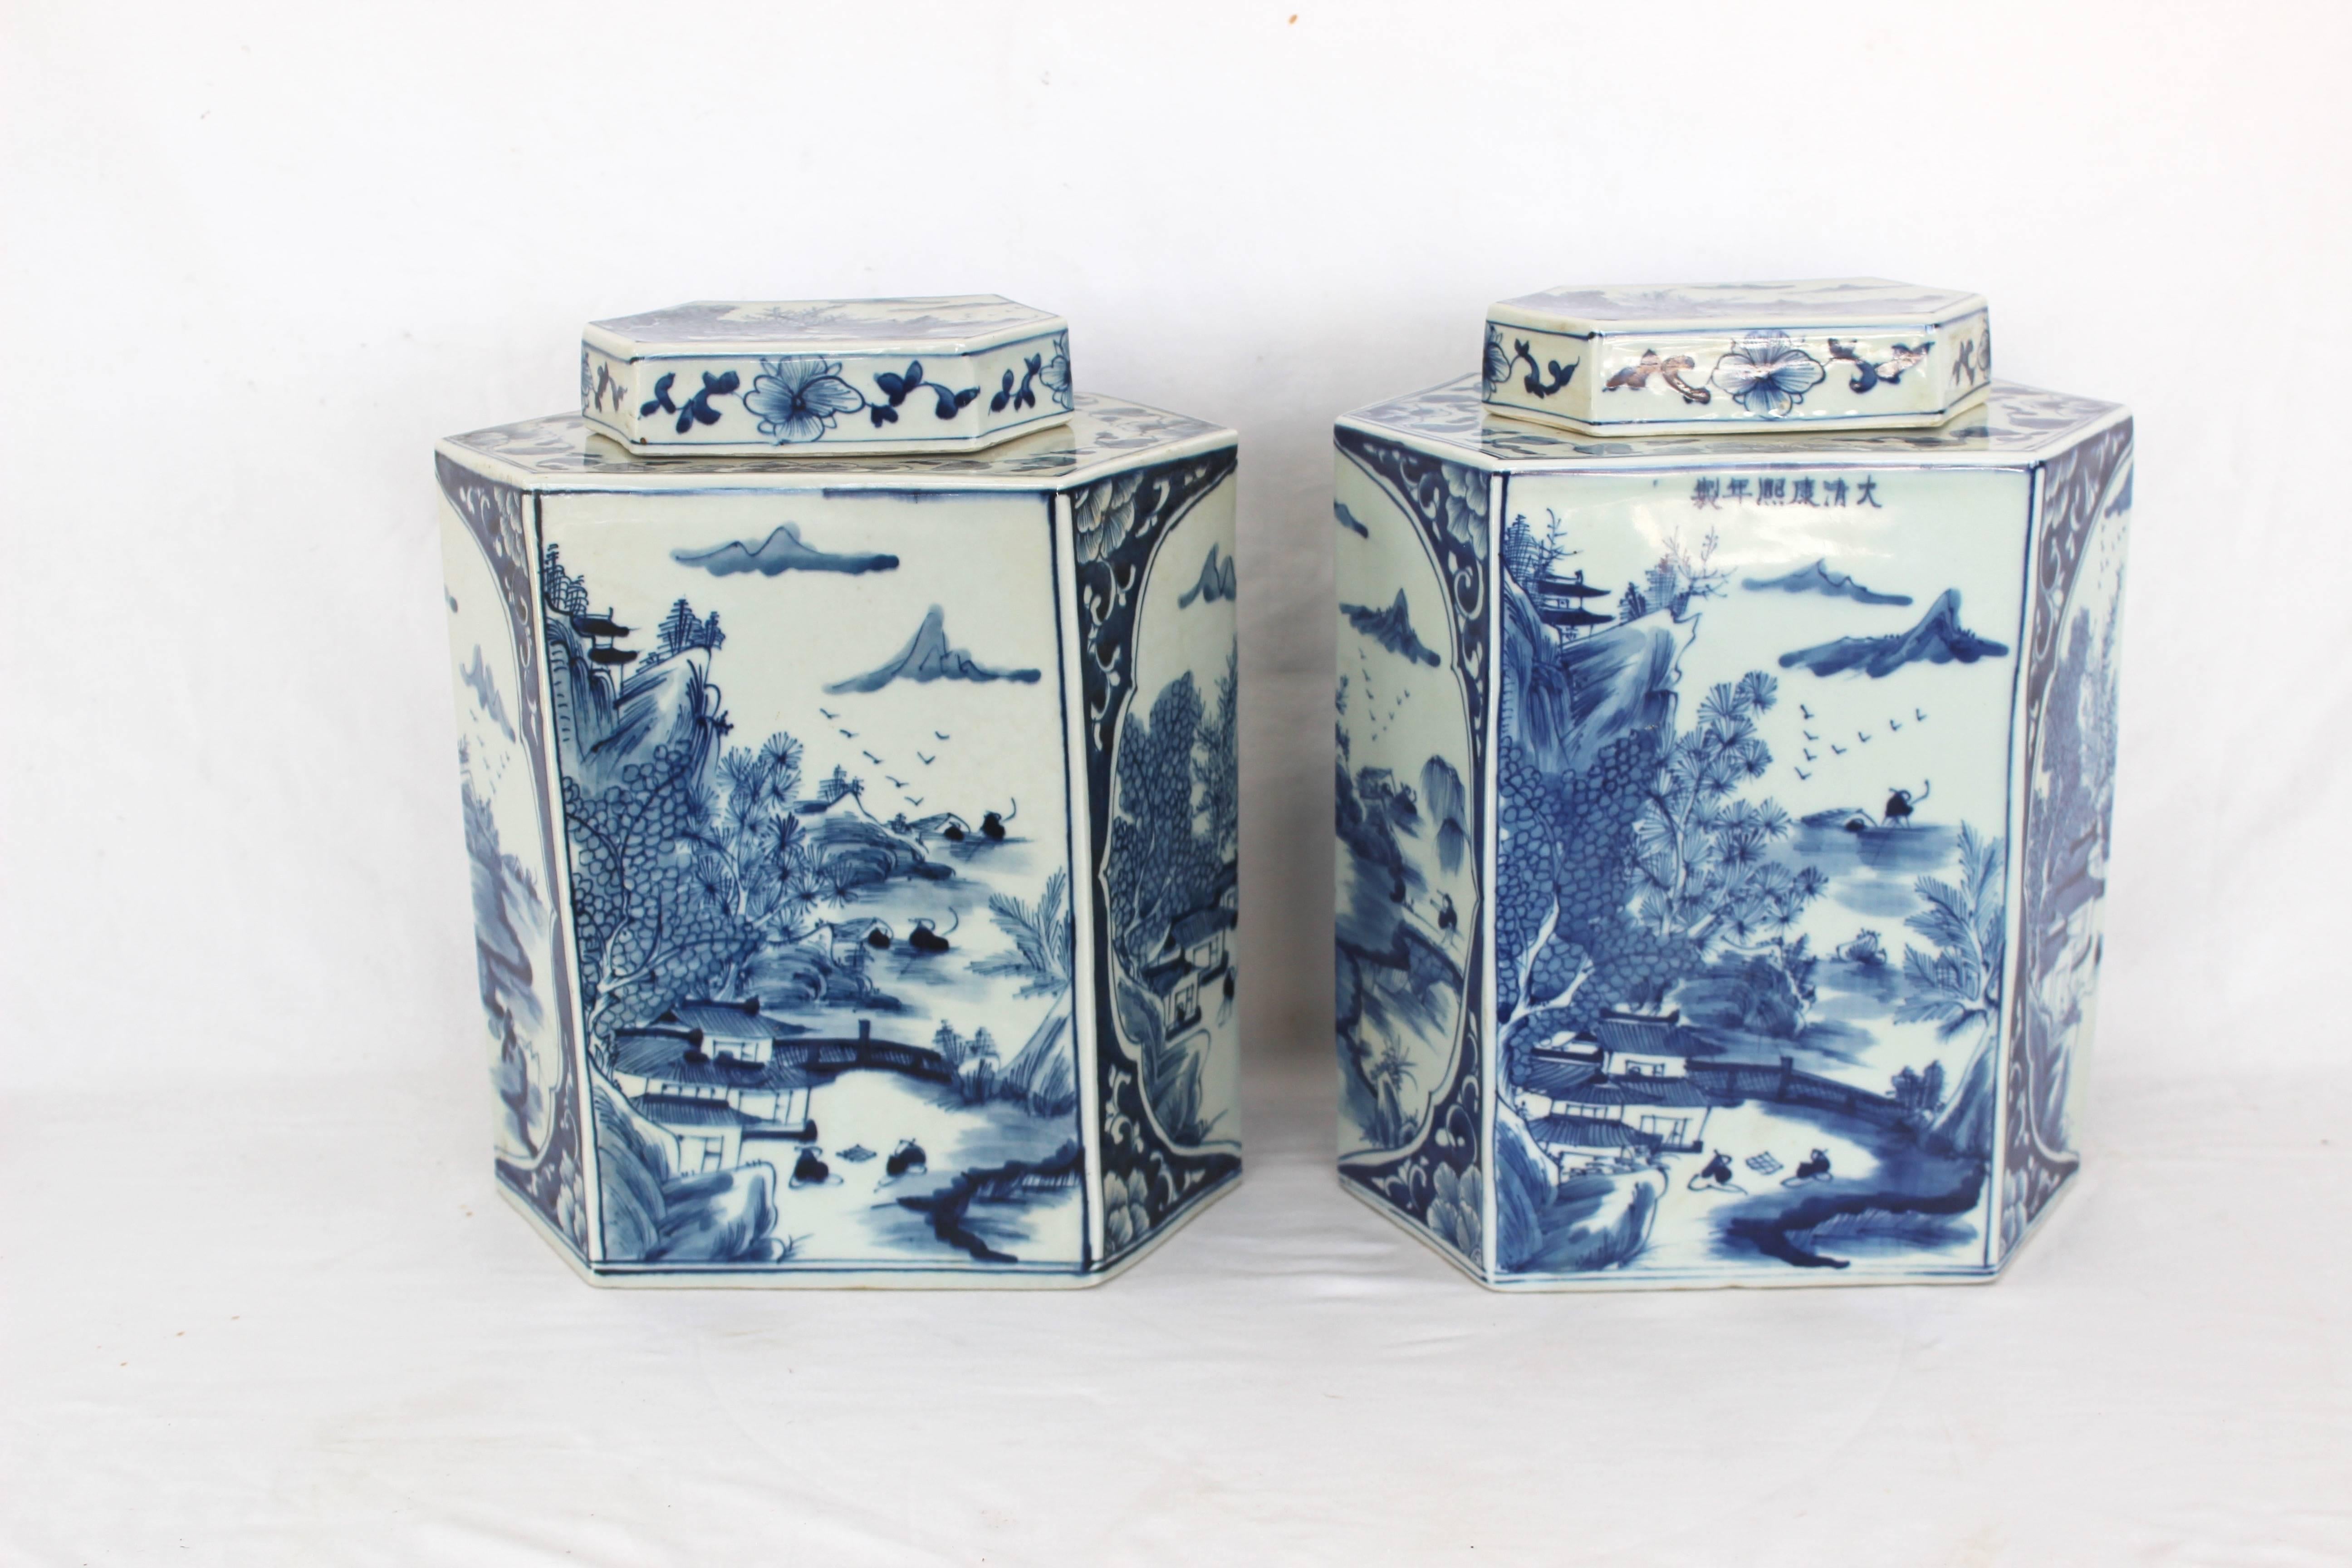 Pair of Hexagonal Chinese Blue and White Tea Caddies with Lids. 
Excellent condition.